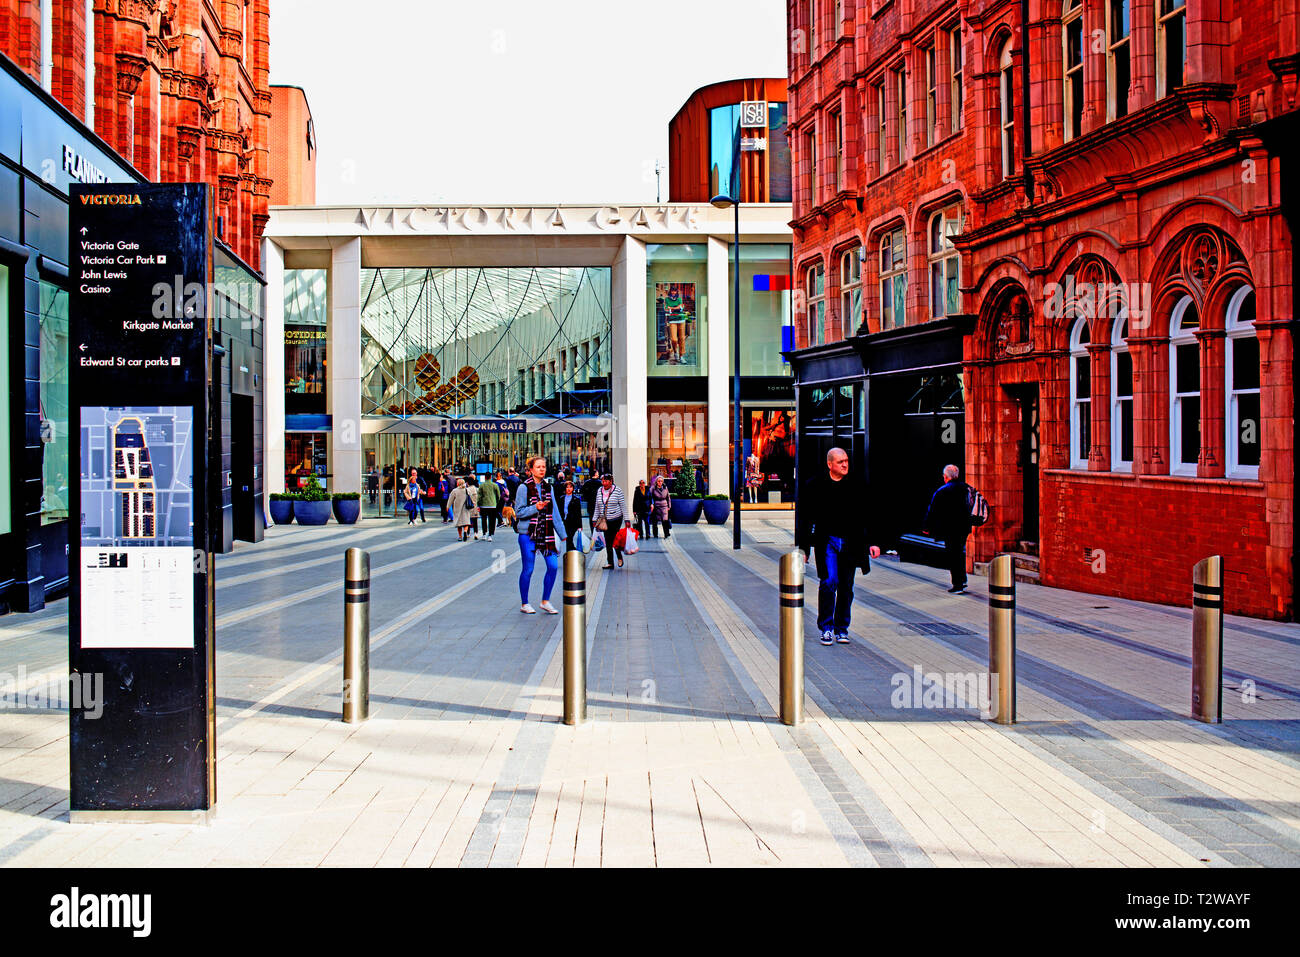 Victoria Gate Shopping Centre, Leeds, Angleterre Banque D'Images